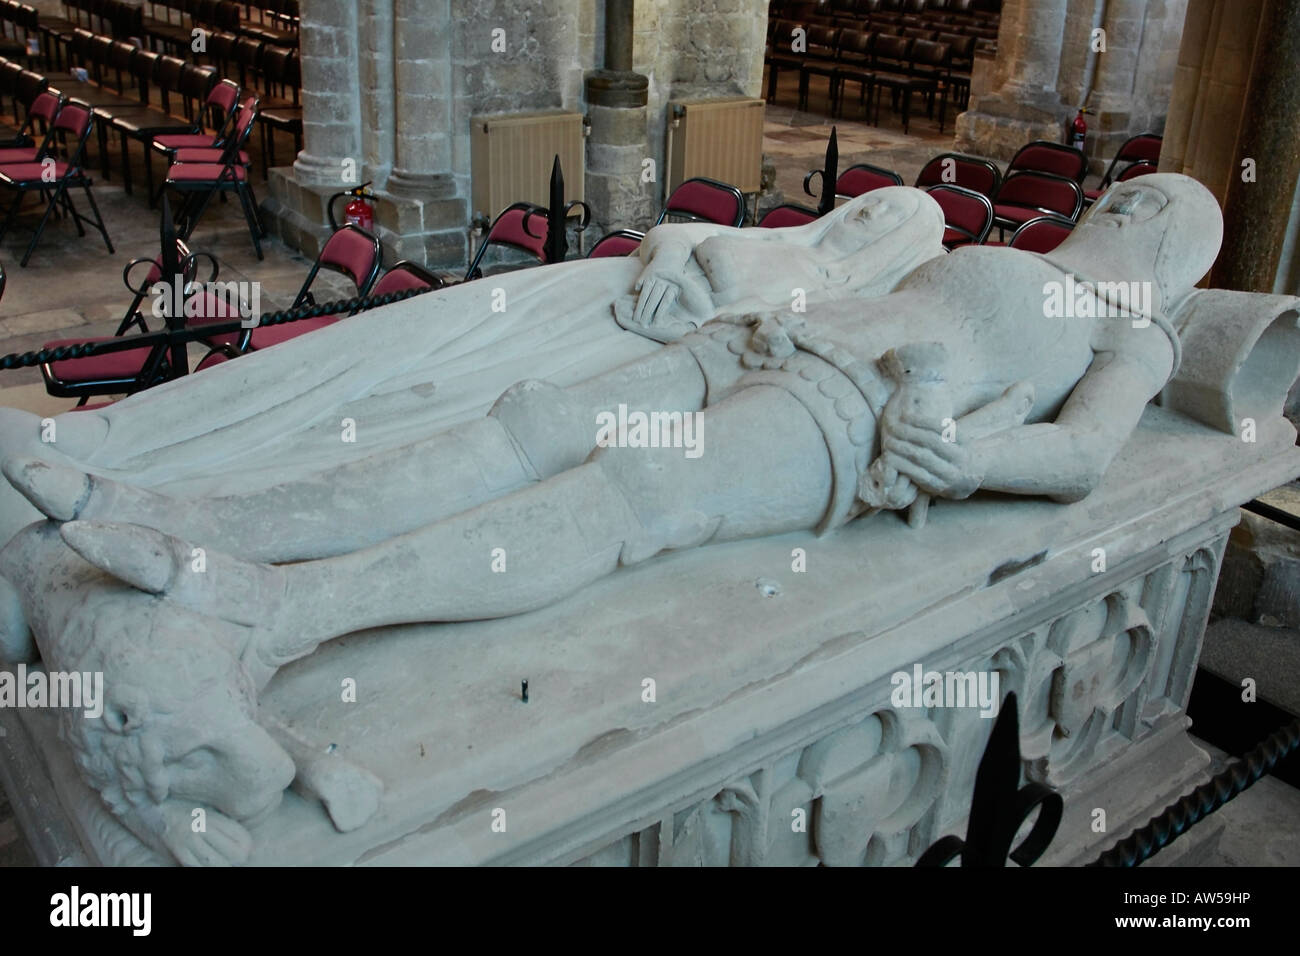 The Arundel Tomb by Philip Larkin inspired by this pair of recumbent medieval tomb effigies, with their hands joined, in Chichester Cathedral, UK Stock Photo